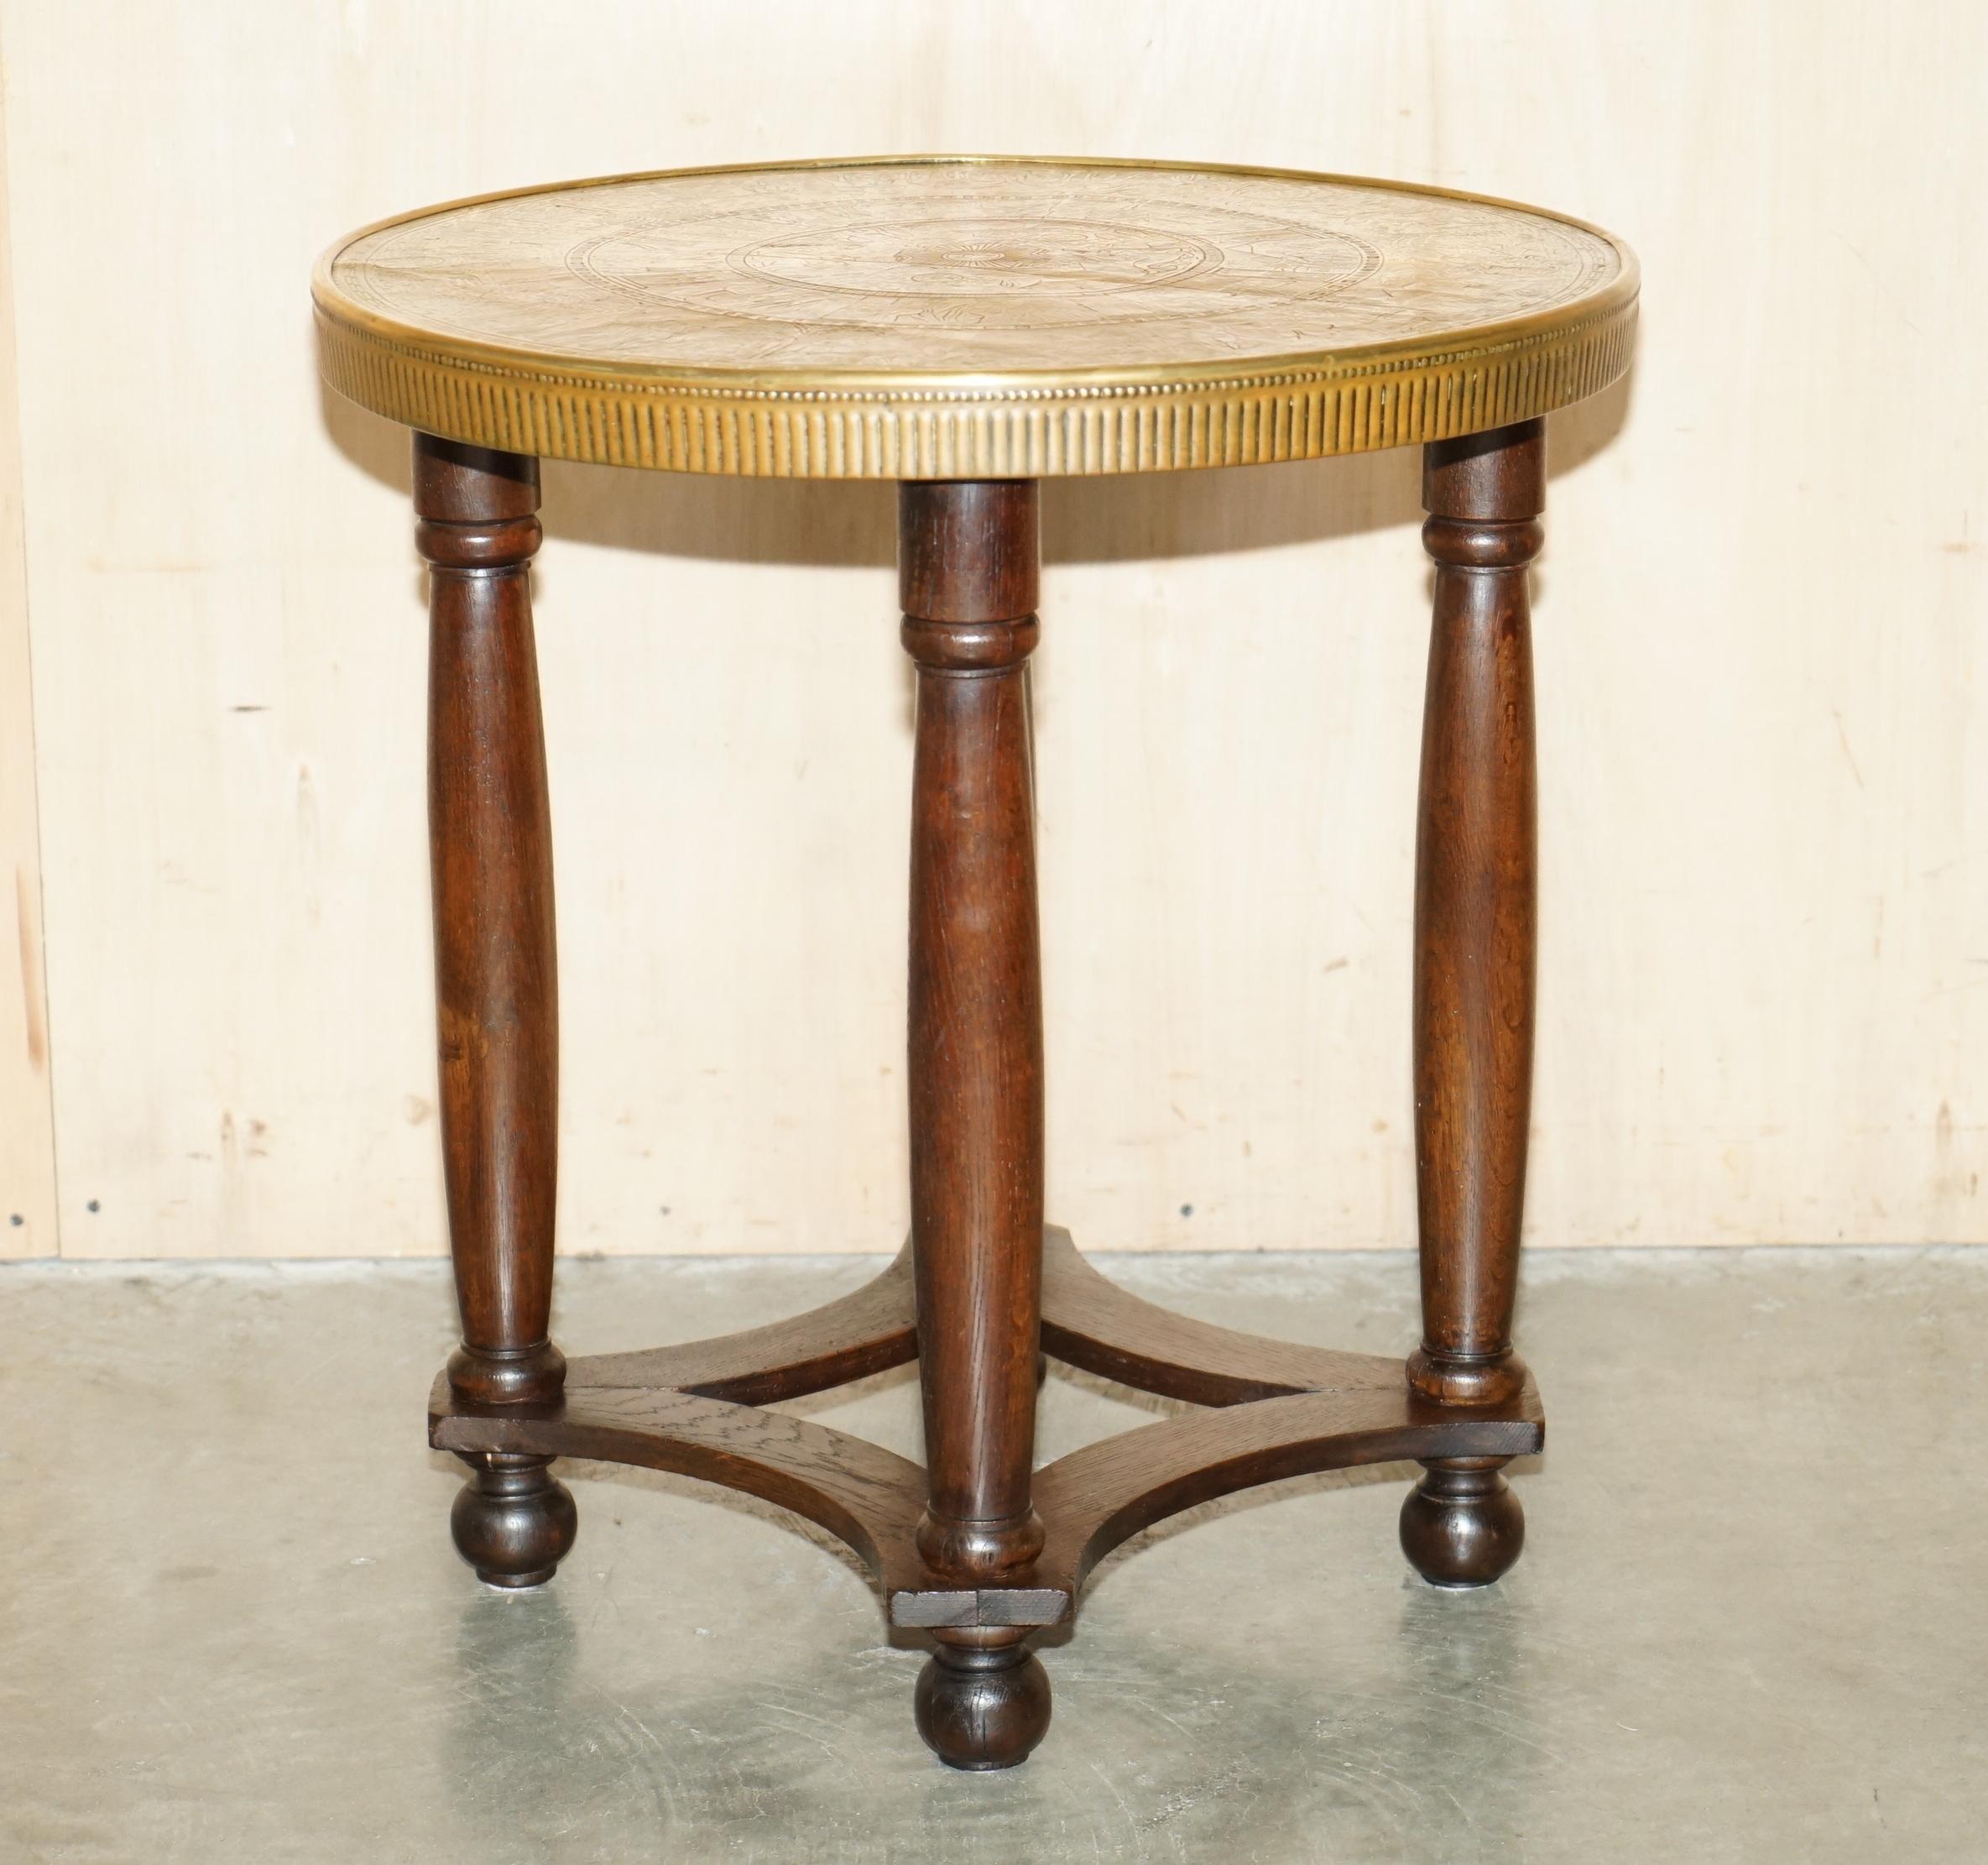 Royal House Antiques

Royal House Antiques is delighted to offer for sale this stunning, super decorative Egyptian brass decorated centre or occasional table with hardwood base

Please note the delivery fee listed is just a guide, it covers within